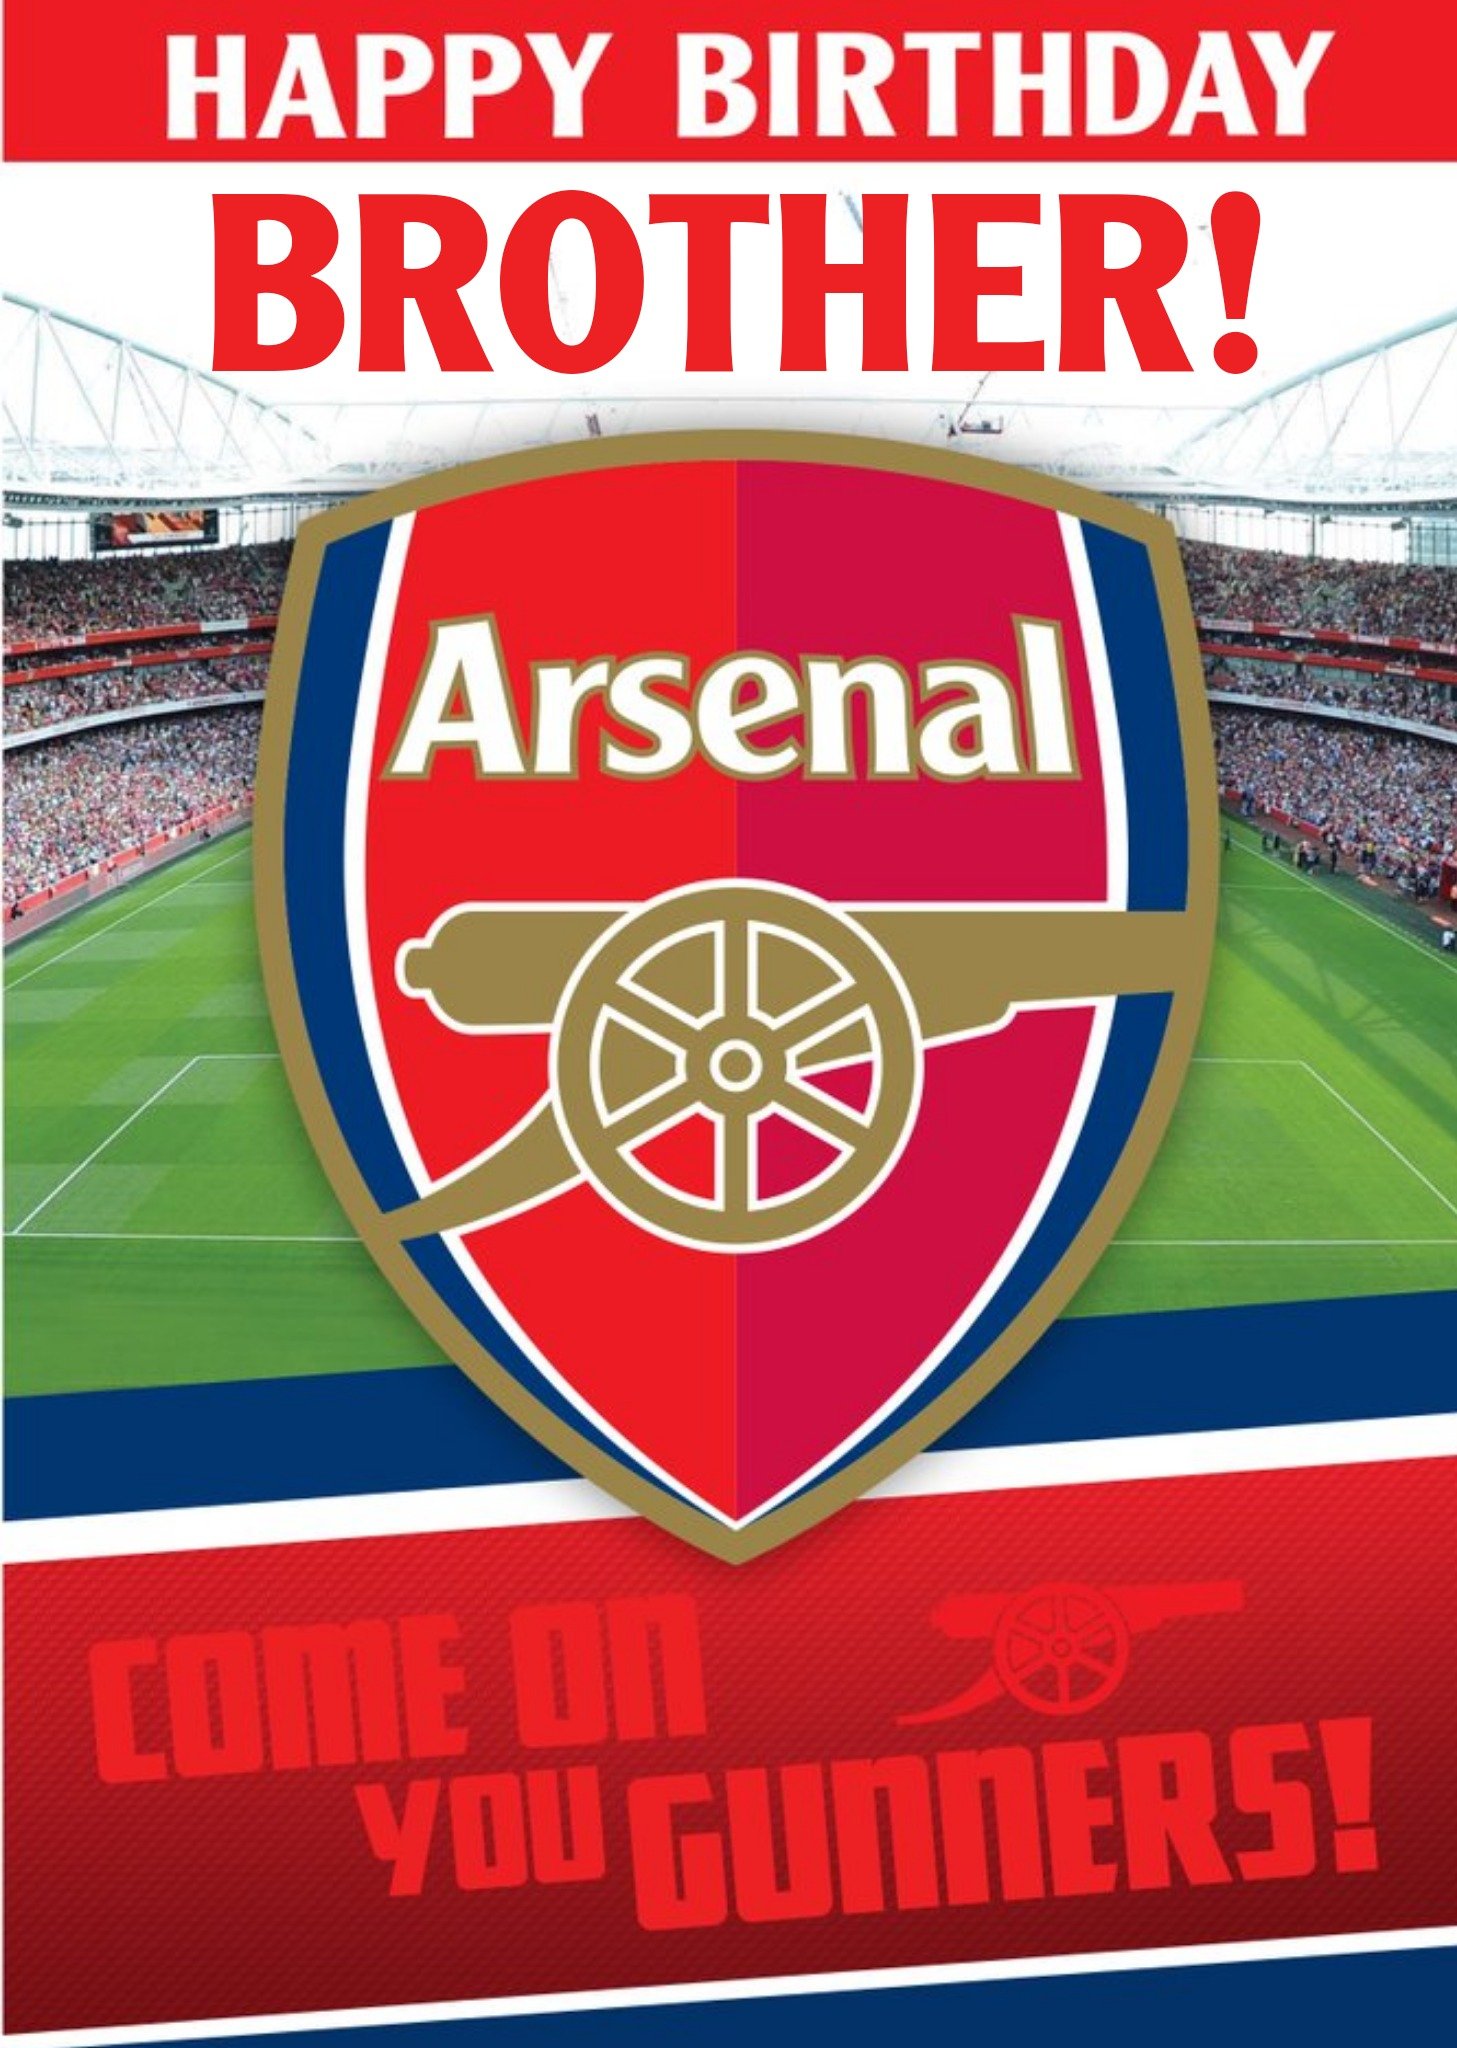 Arsenal Football Stadium Come On You Gunners Brother Happy Birthday Card, Large